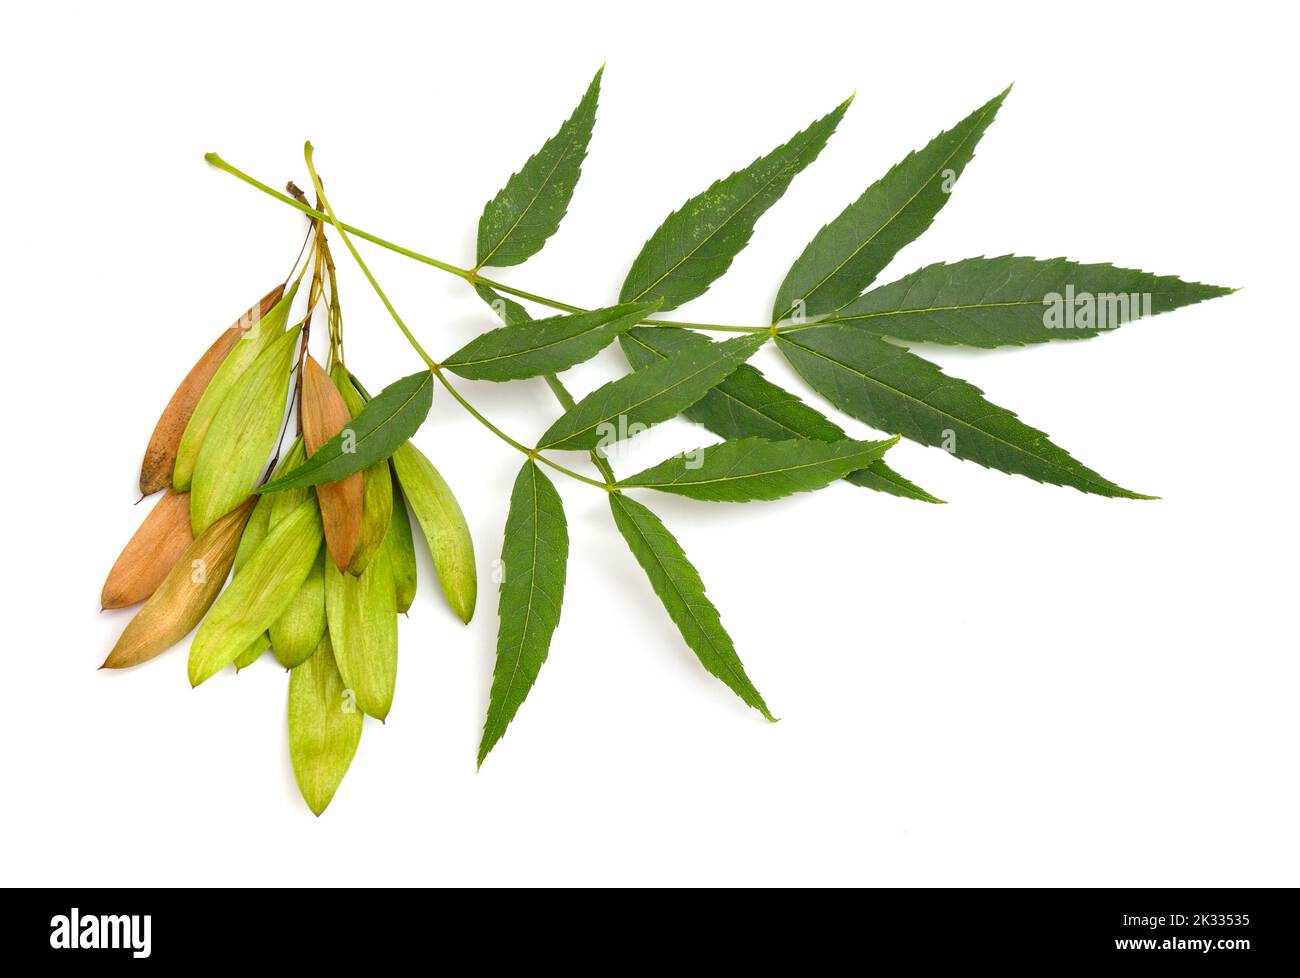 Fraxinus angustifolia, the narrow-leaved ash. Isolated on white. Stock Photo